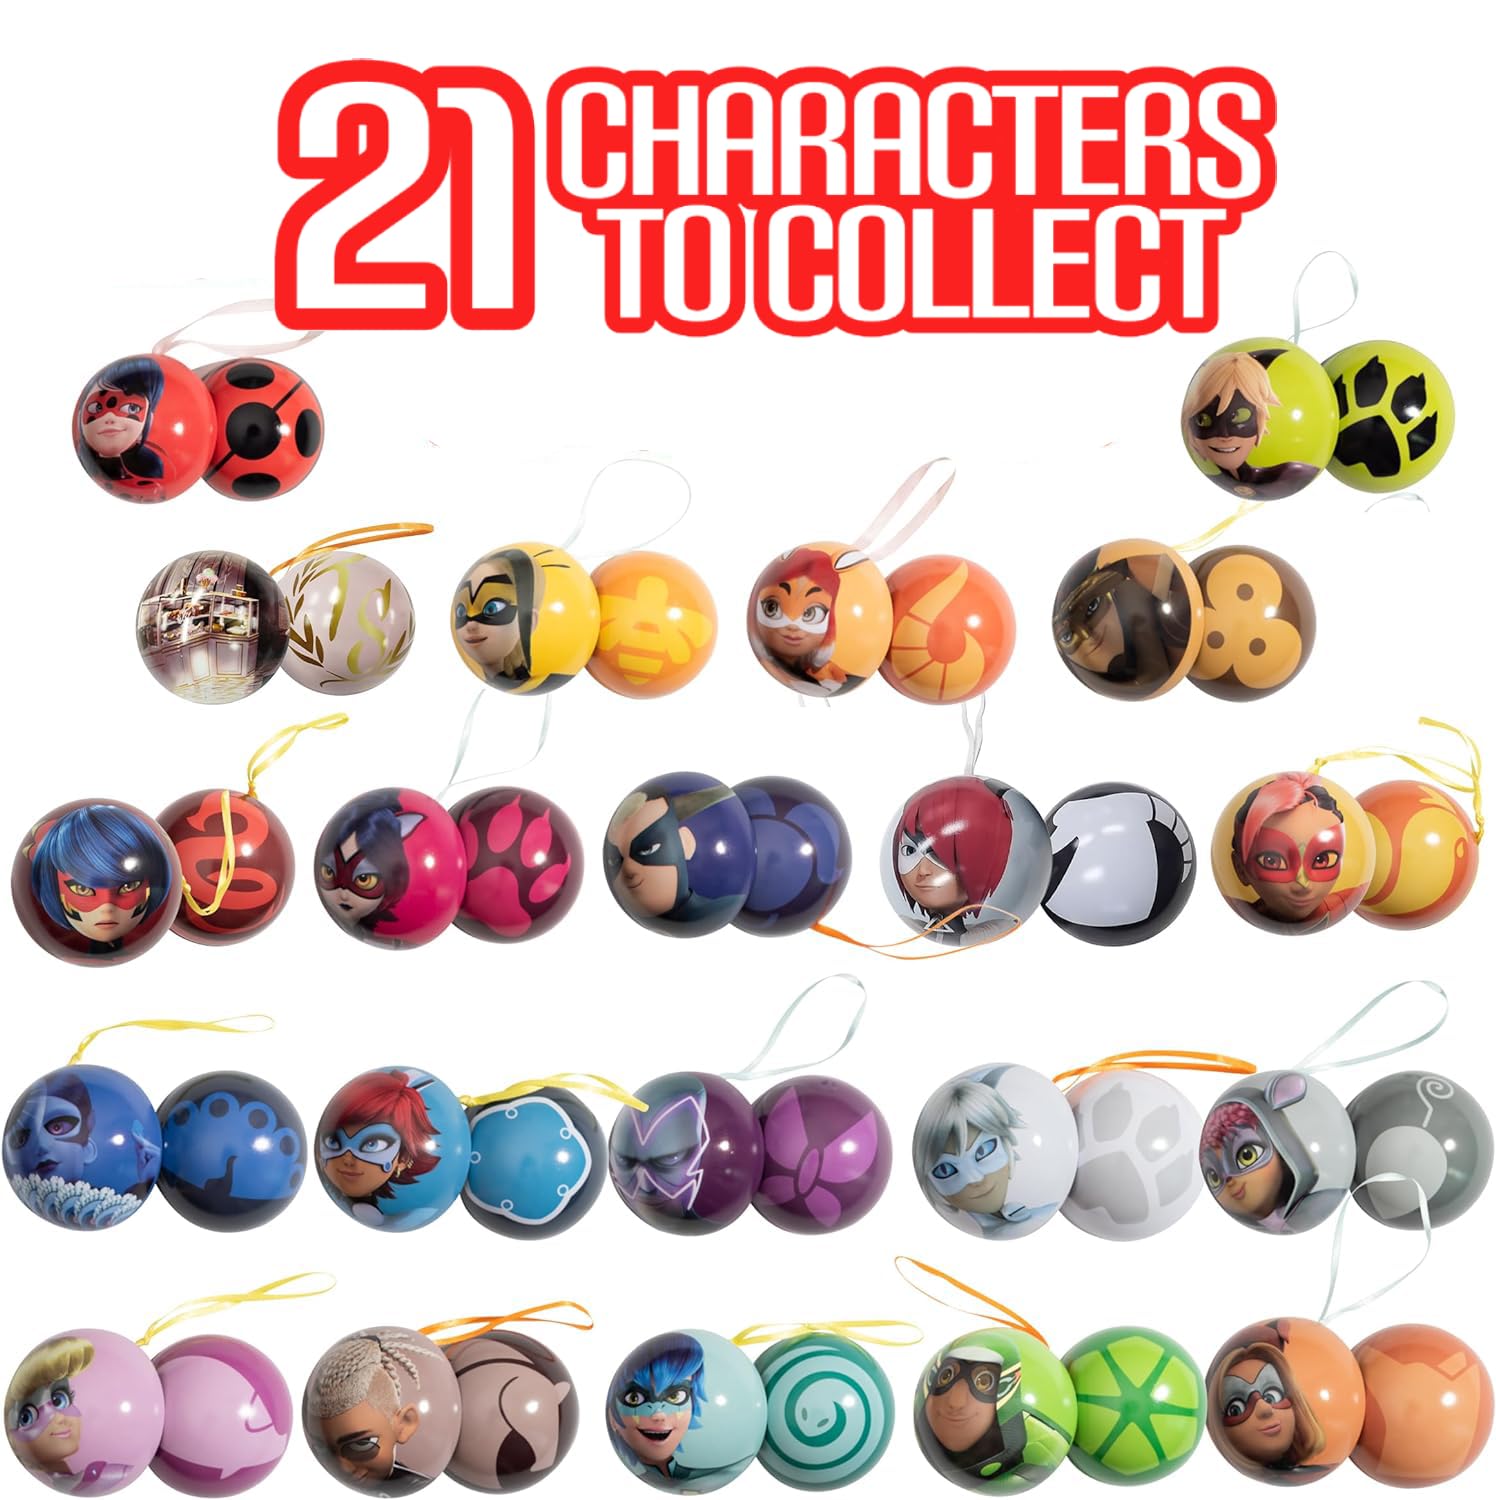 Miraculous Ladybug, 4-1 Surprise Miraball, 3 Pack, Toys for Kids with Collectible Character Metal Ball, Kwami Plush, Glittery Stickers and White Ribbon (Wyncor)